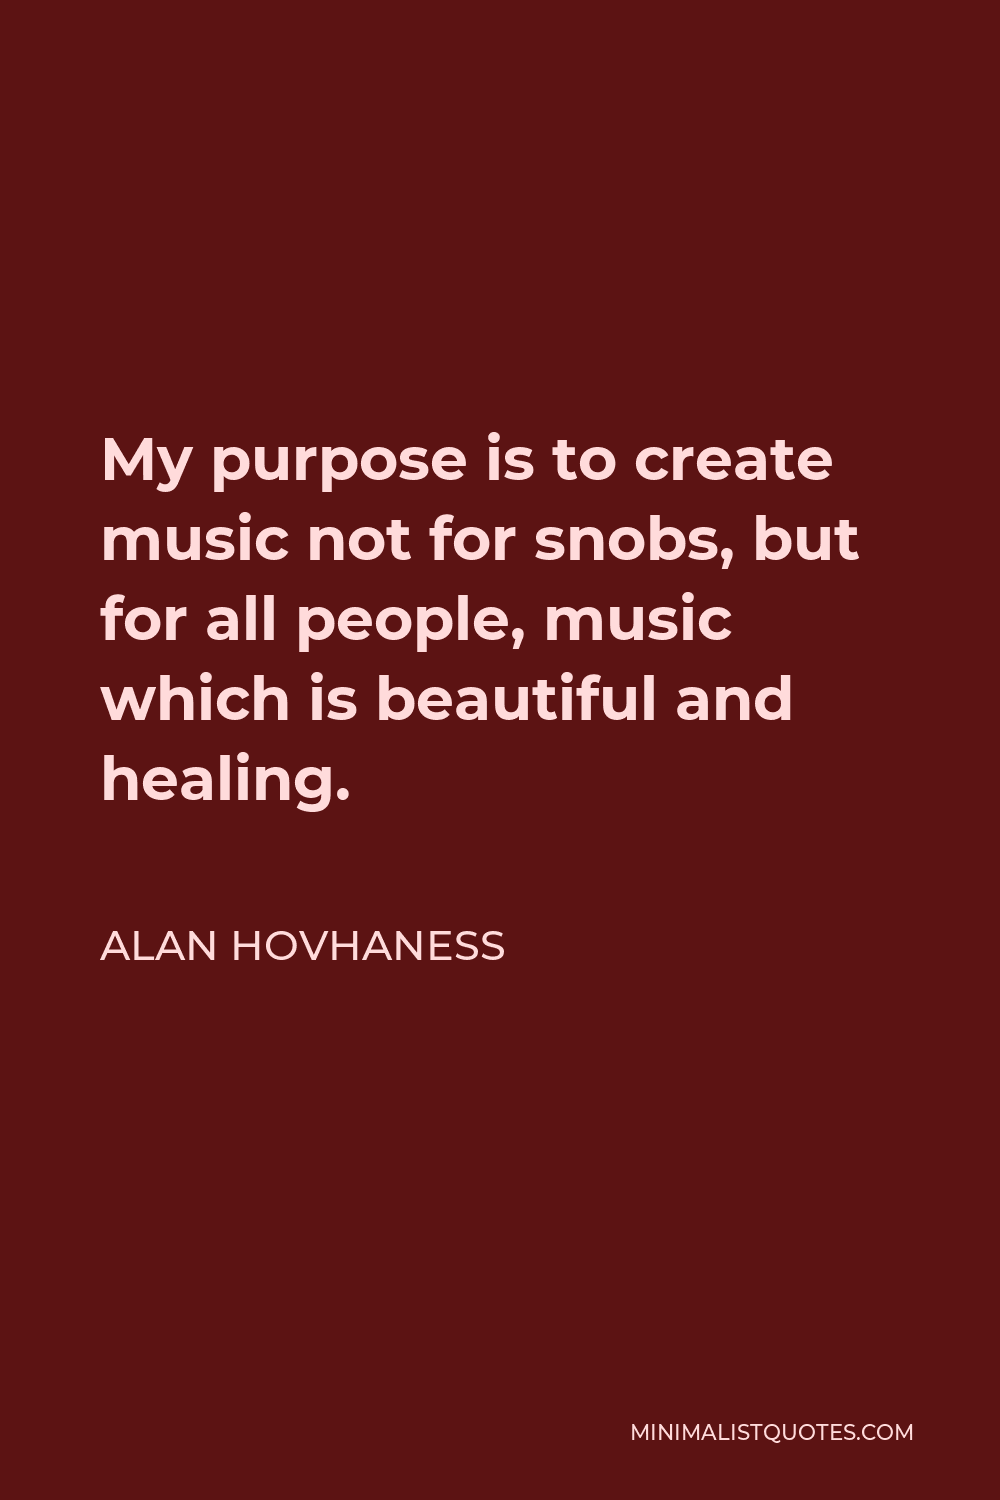 Alan Hovhaness Quote - My purpose is to create music not for snobs, but for all people, music which is beautiful and healing.